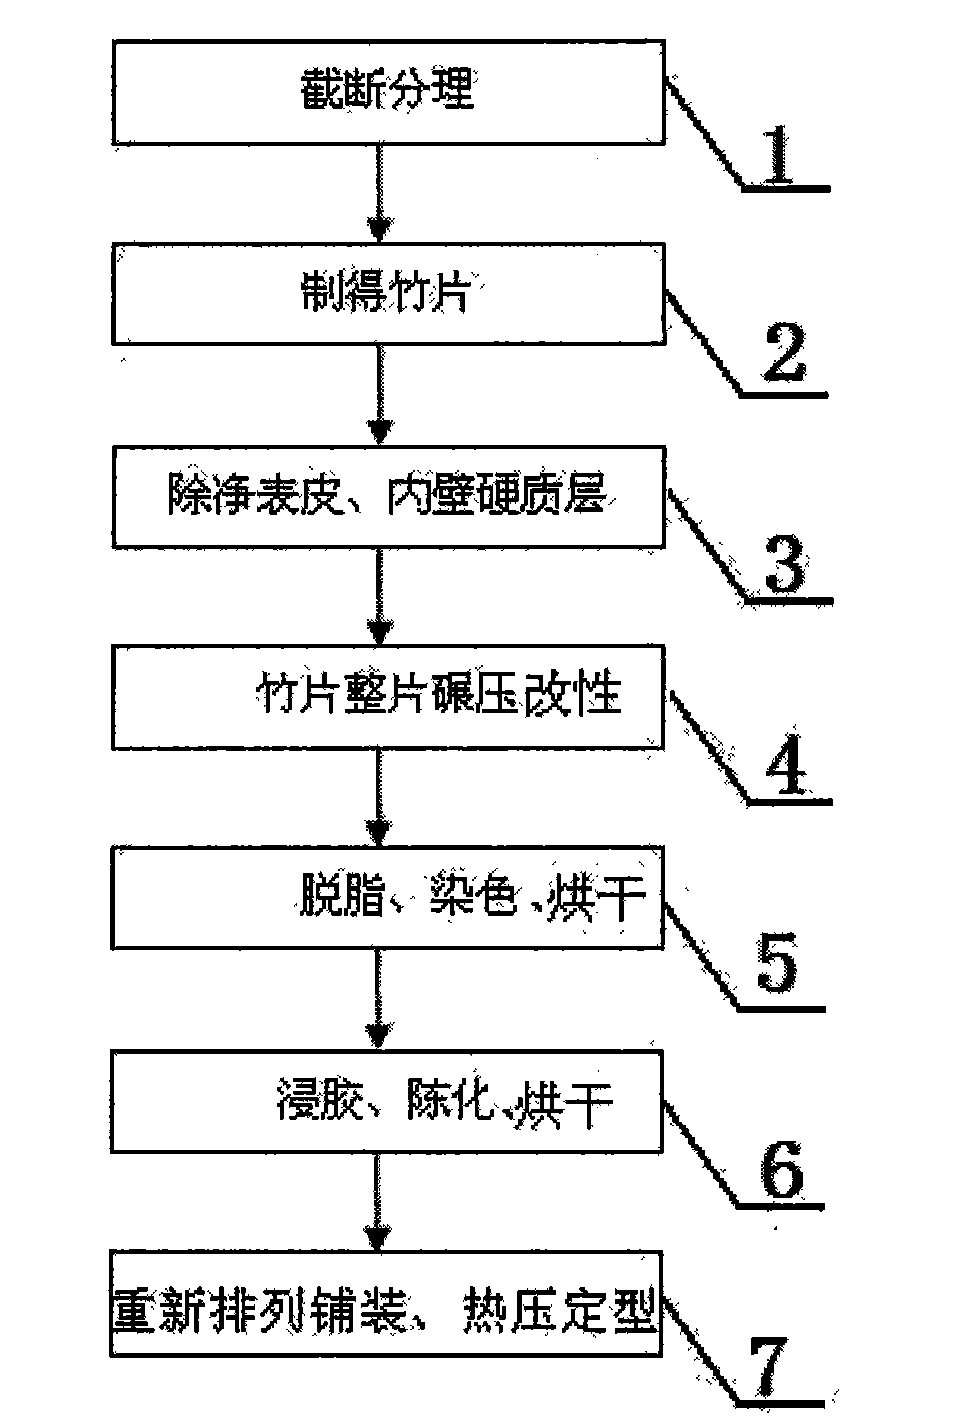 Process for manufacturing large-breadth plates by using all-bamboo modified material